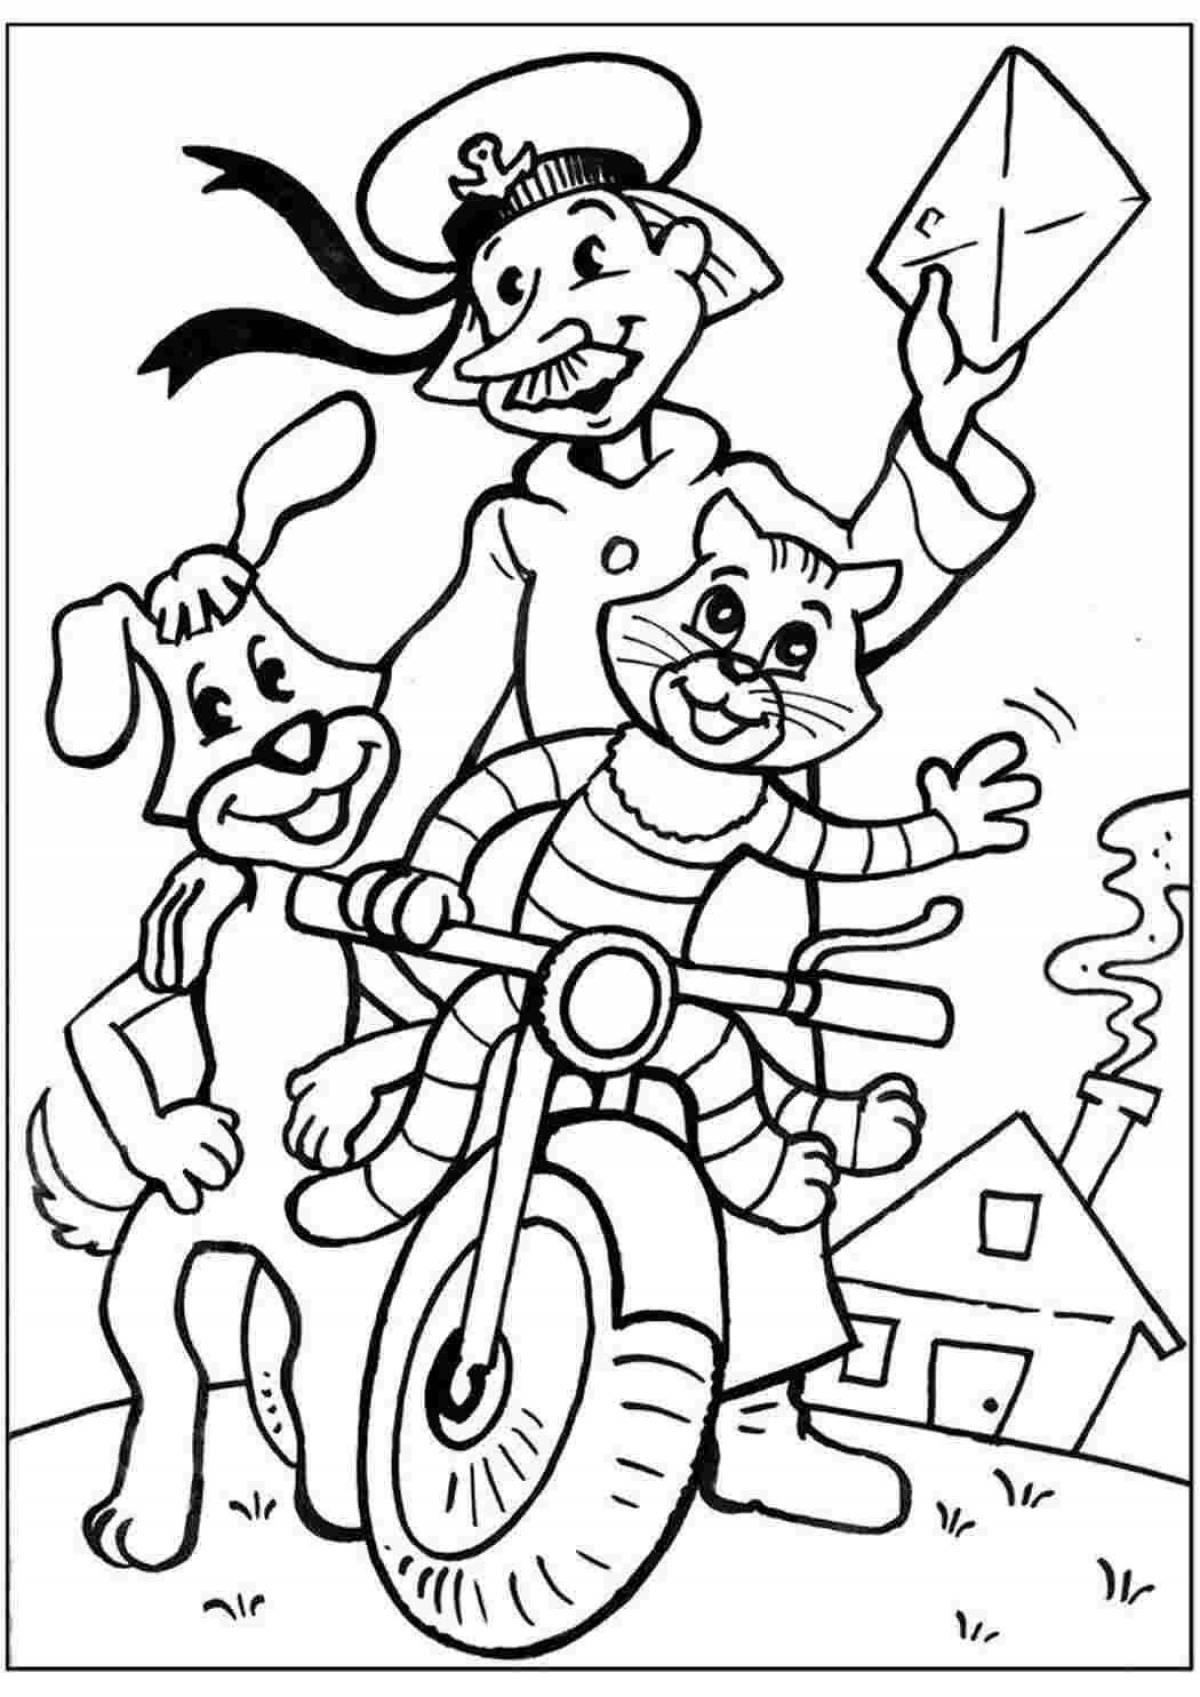 Coloring page charming buttermilk